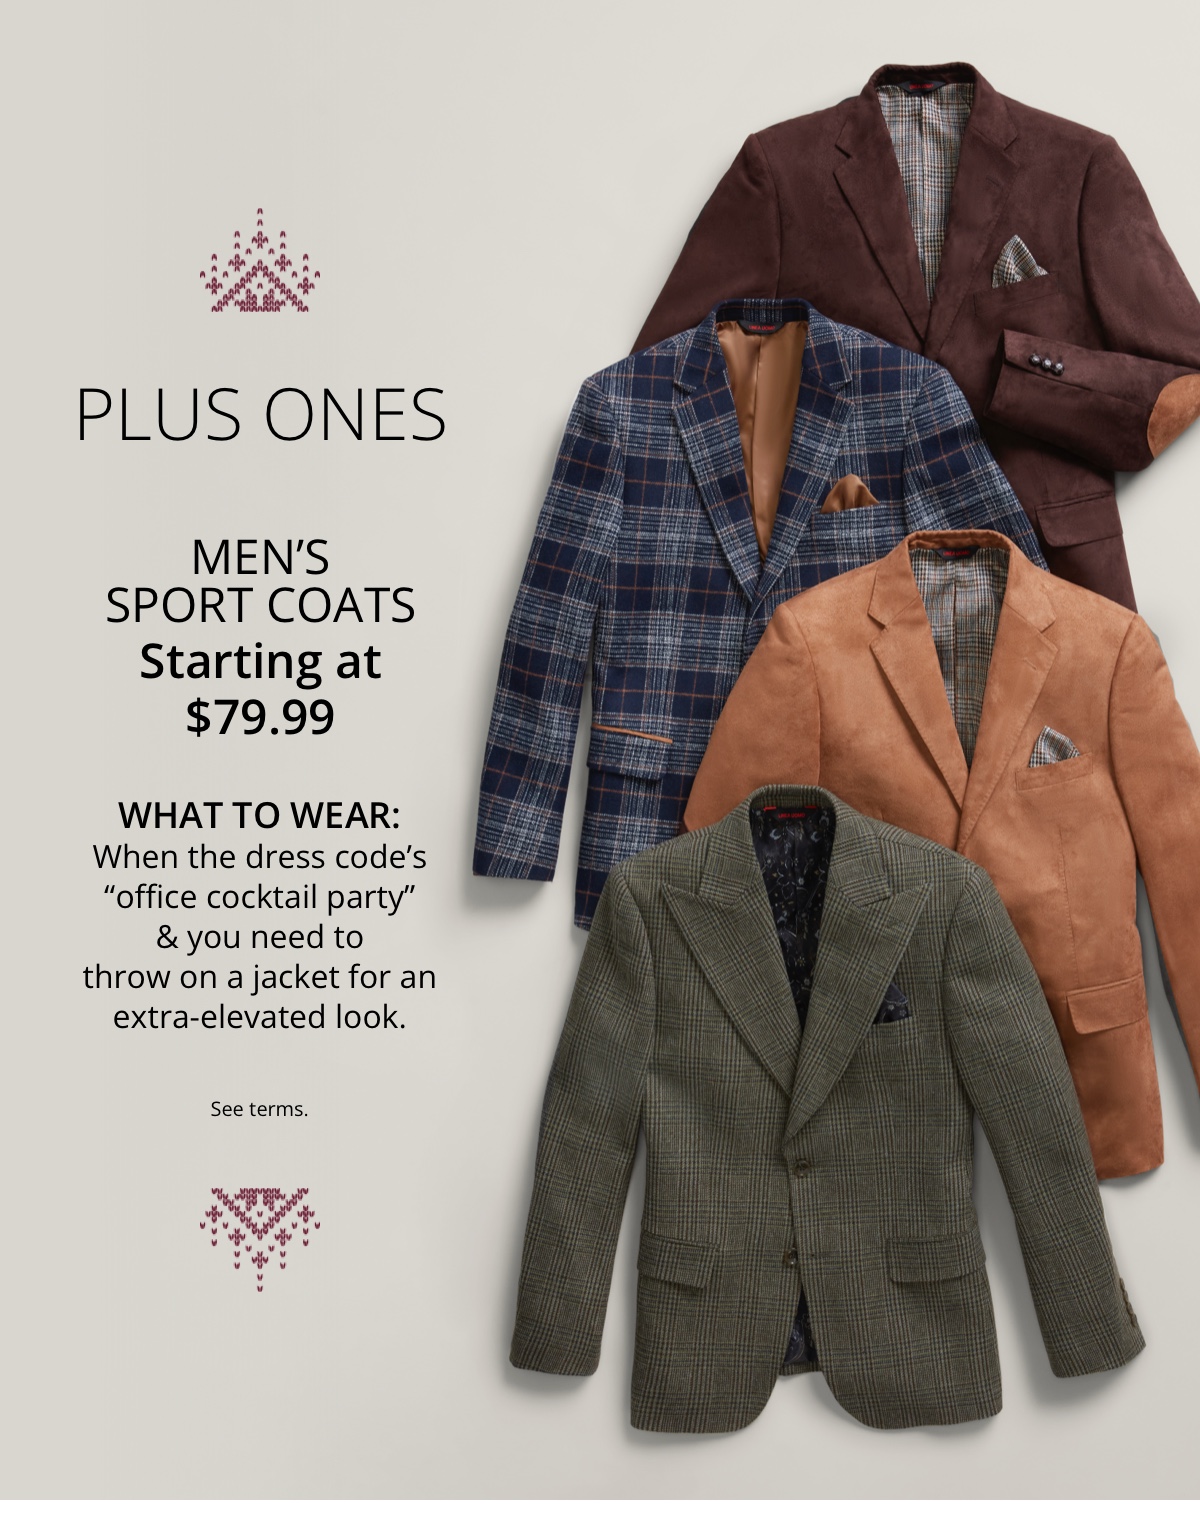 Plus Ones|Mens Sport Coats|Starting at $79.99|What to Wear:|When the dress codes office cocktail party and you need to throw on a jacket for an extra-elevated look.|See terms.